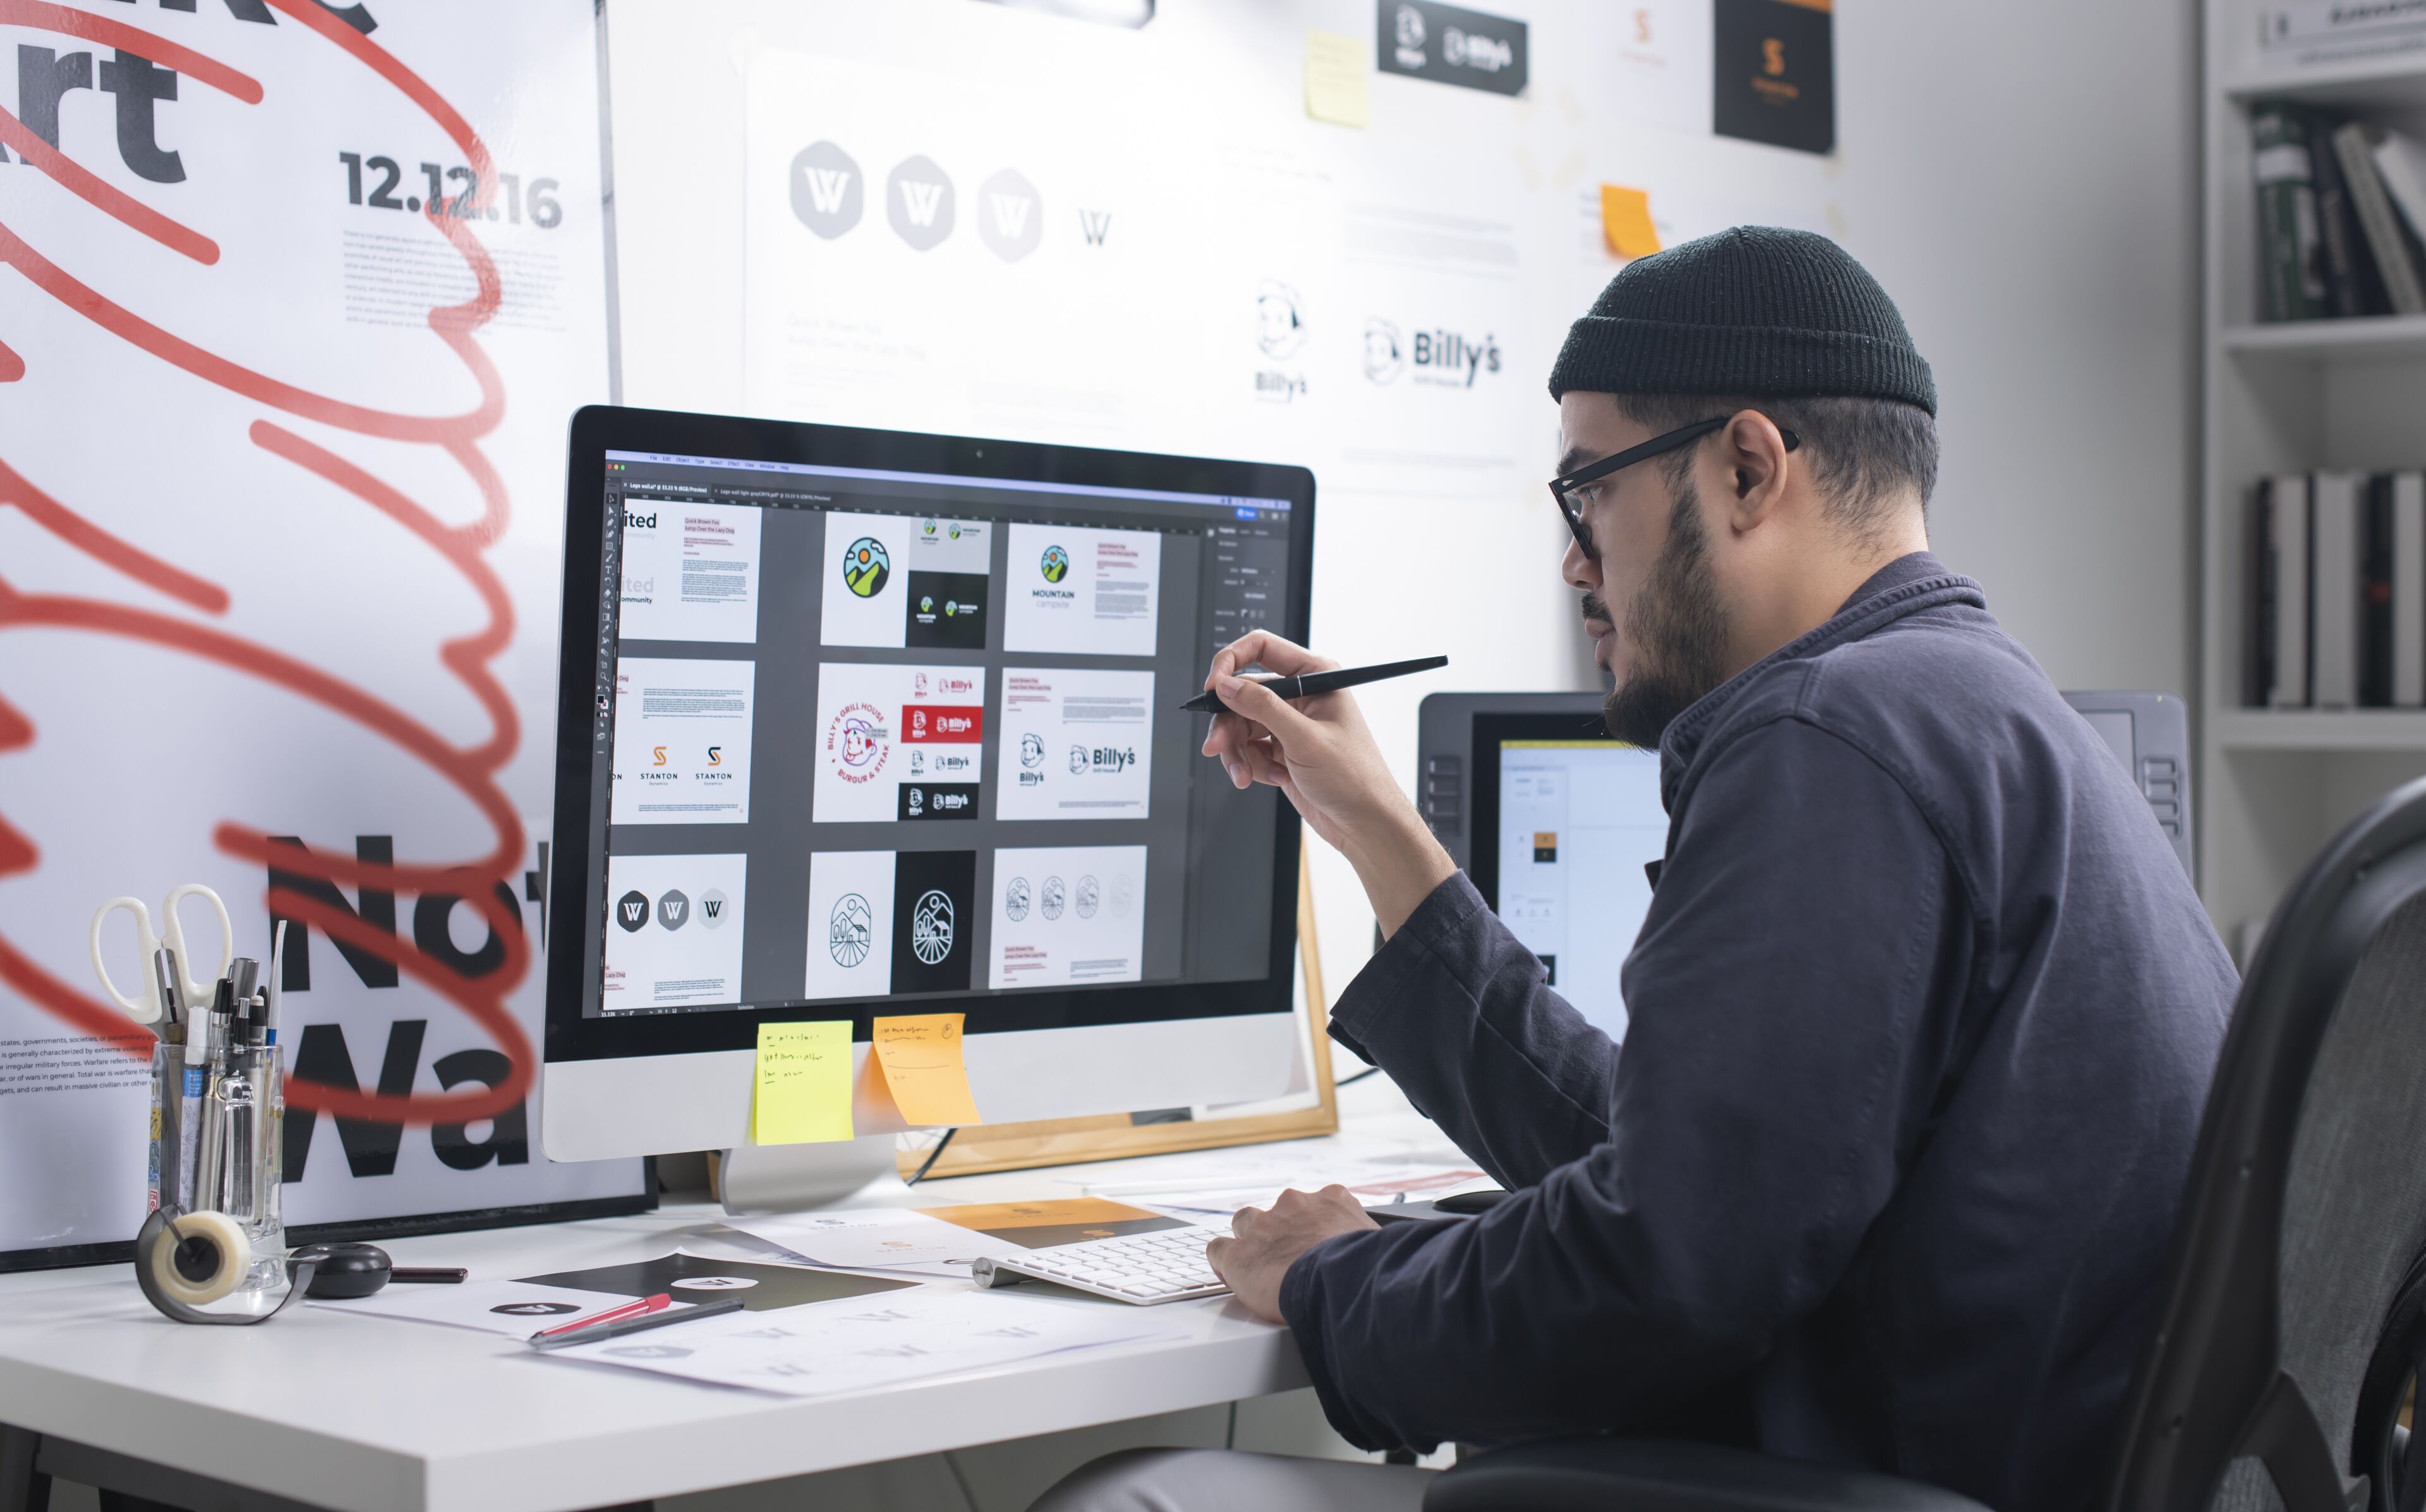 ImageA male graphic designer wearing a beanie reviews designs on a large monitor, stylus in hand, in a well-organized workspace.